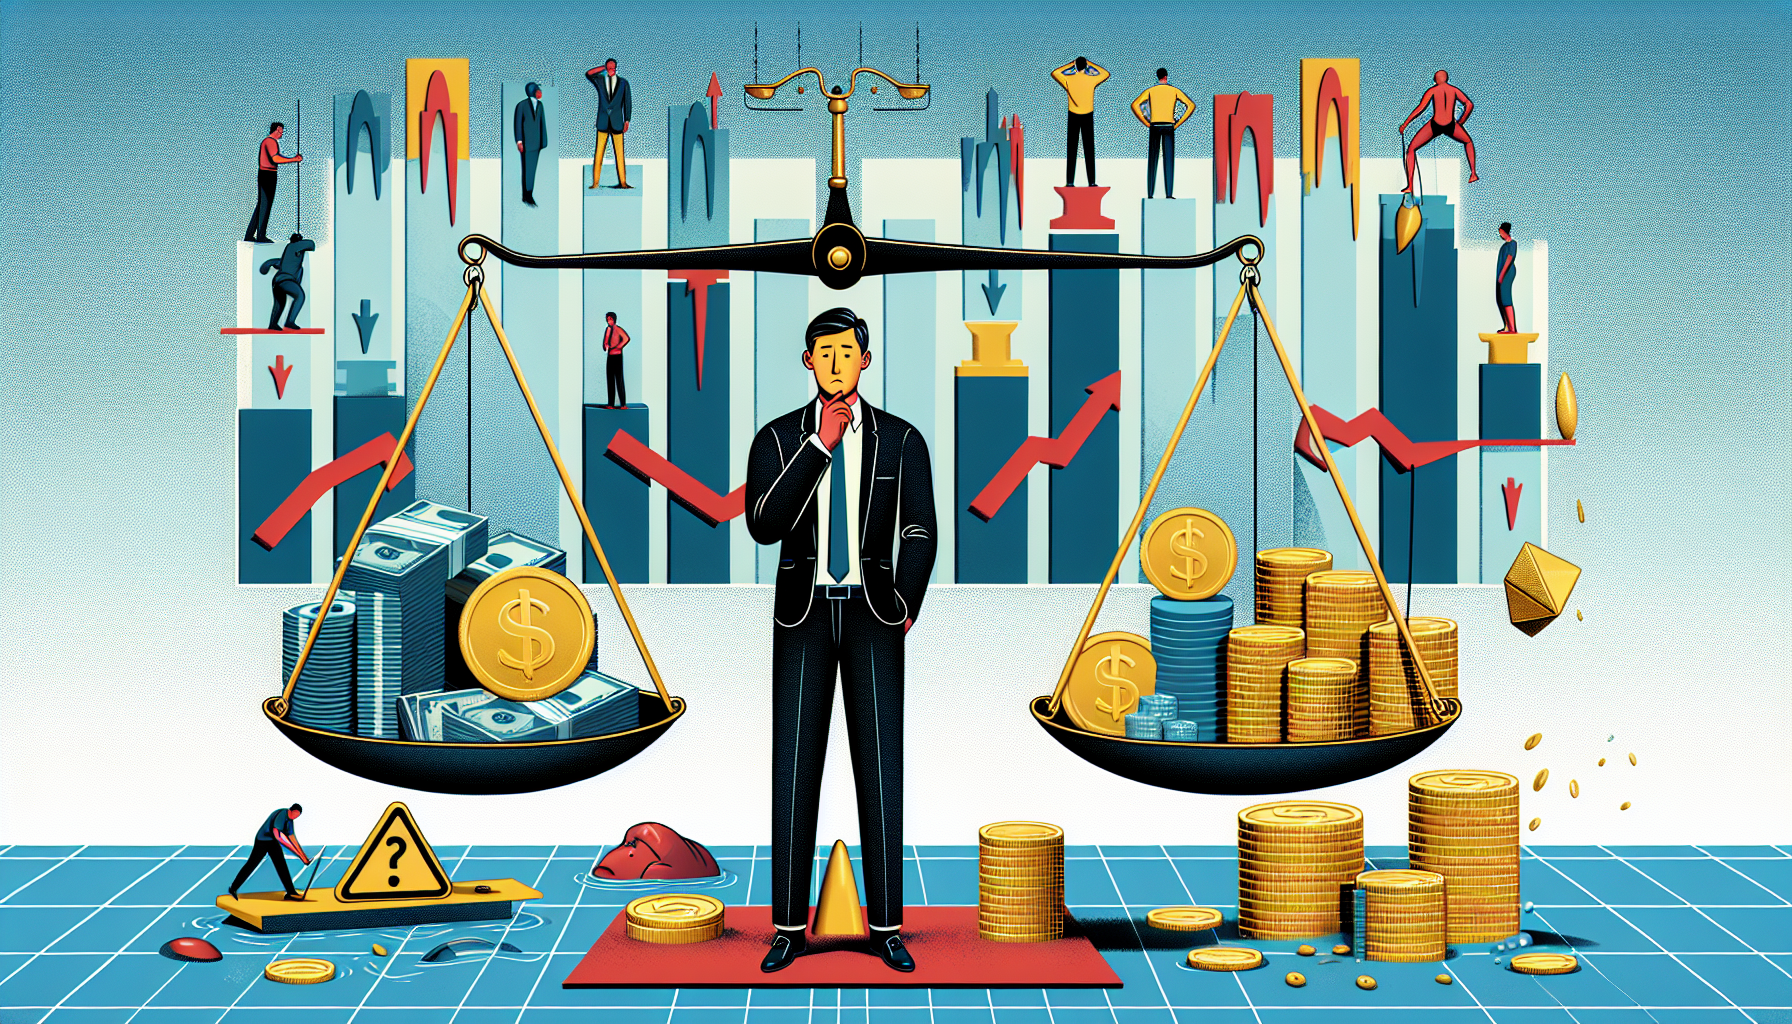 Create an image depicting a balanced scale. On one side of the scale, place a stack of dollar bills, coins, and gold bars representing financial rewards. On the other side, place symbols of risk, such as exaggerated diving boards above empty pools, falling stock graphs, and warning signs. In the background, show a thoughtful but slightly anxious investor weighing their options, surrounded by a blend of bullish and bearish market charts. The image should have a modern, clean aesthetic that conveys the careful consideration required for margin investing.